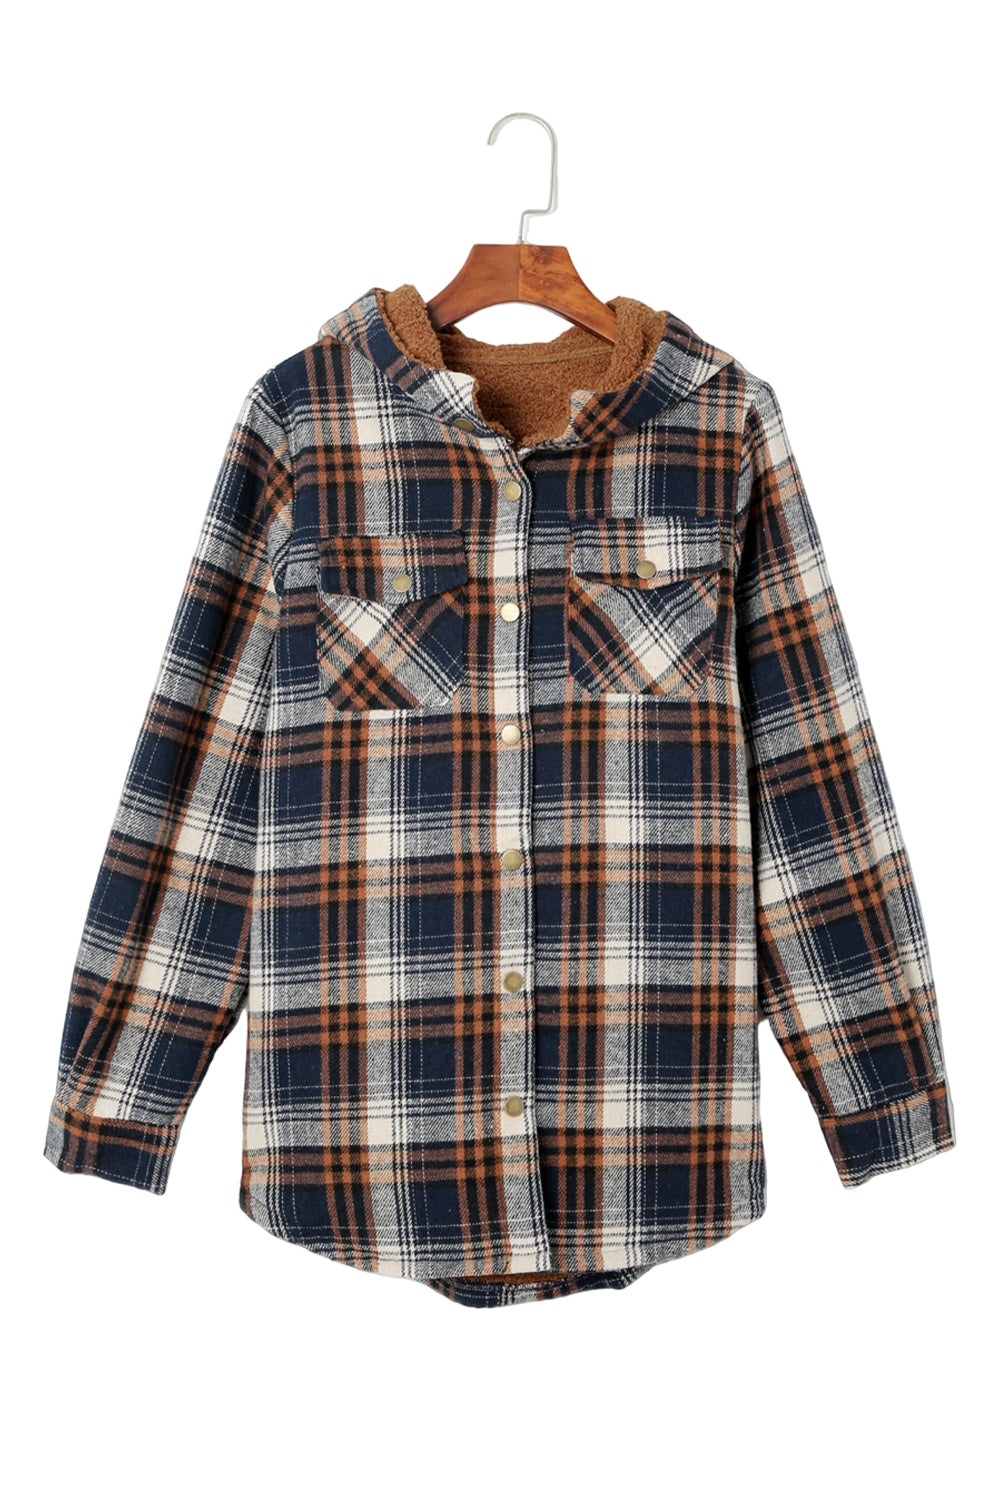 Plaid Pattern Sherpa Lined Hooded Shacket - Dixie Hike & Style